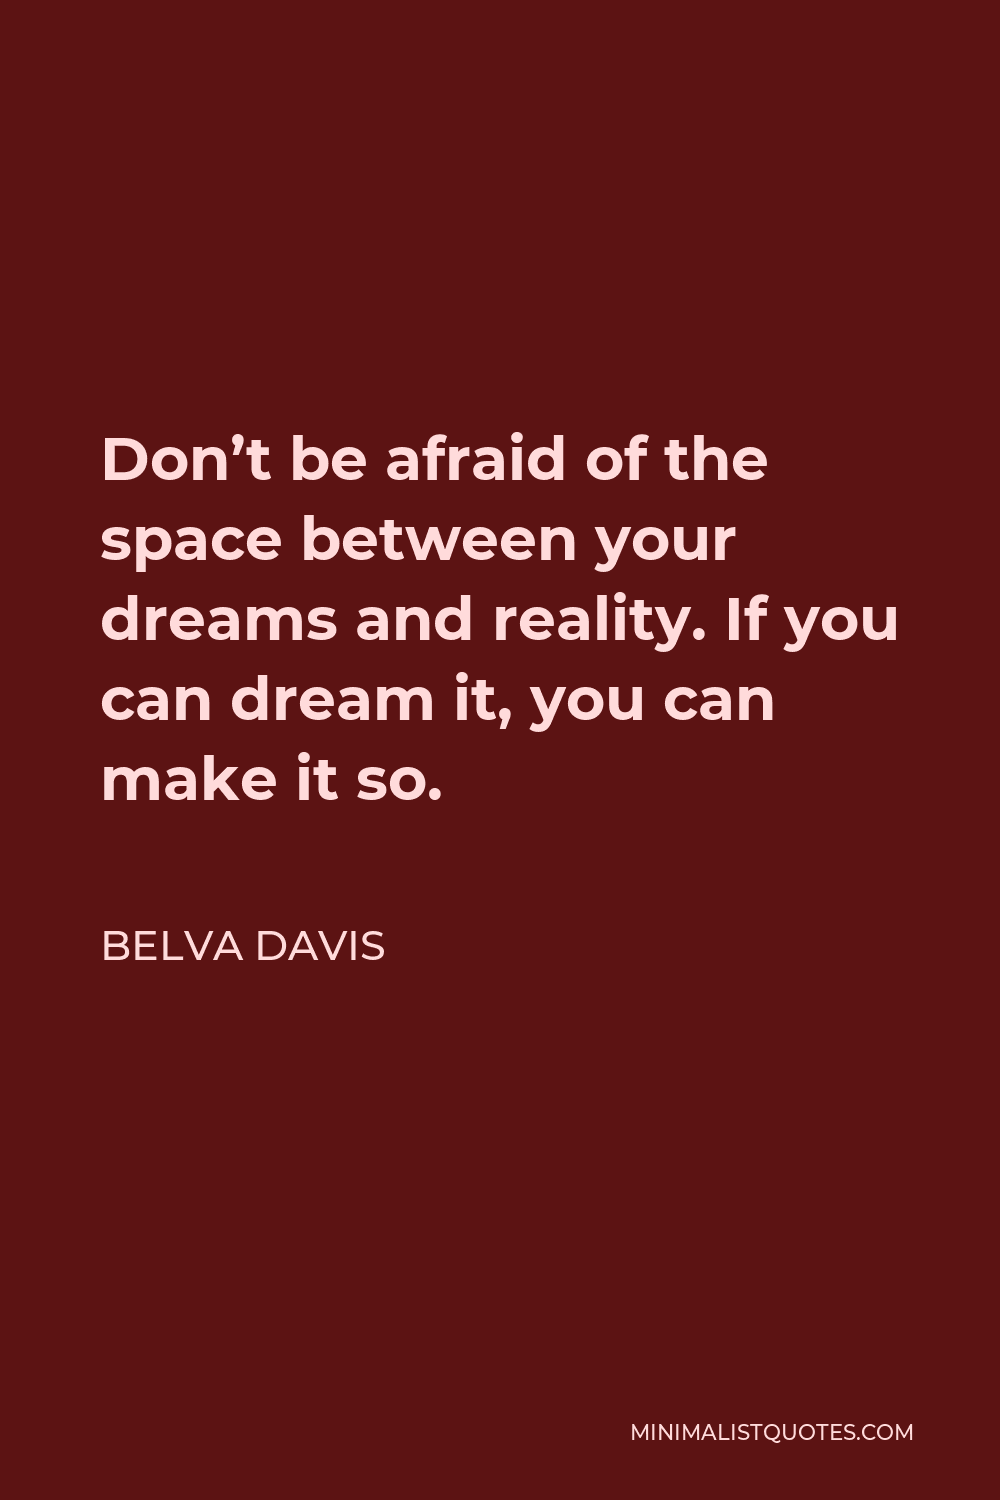 Belva Davis Quote - Don’t be afraid of the space between your dreams and reality. If you can dream it, you can make it so.